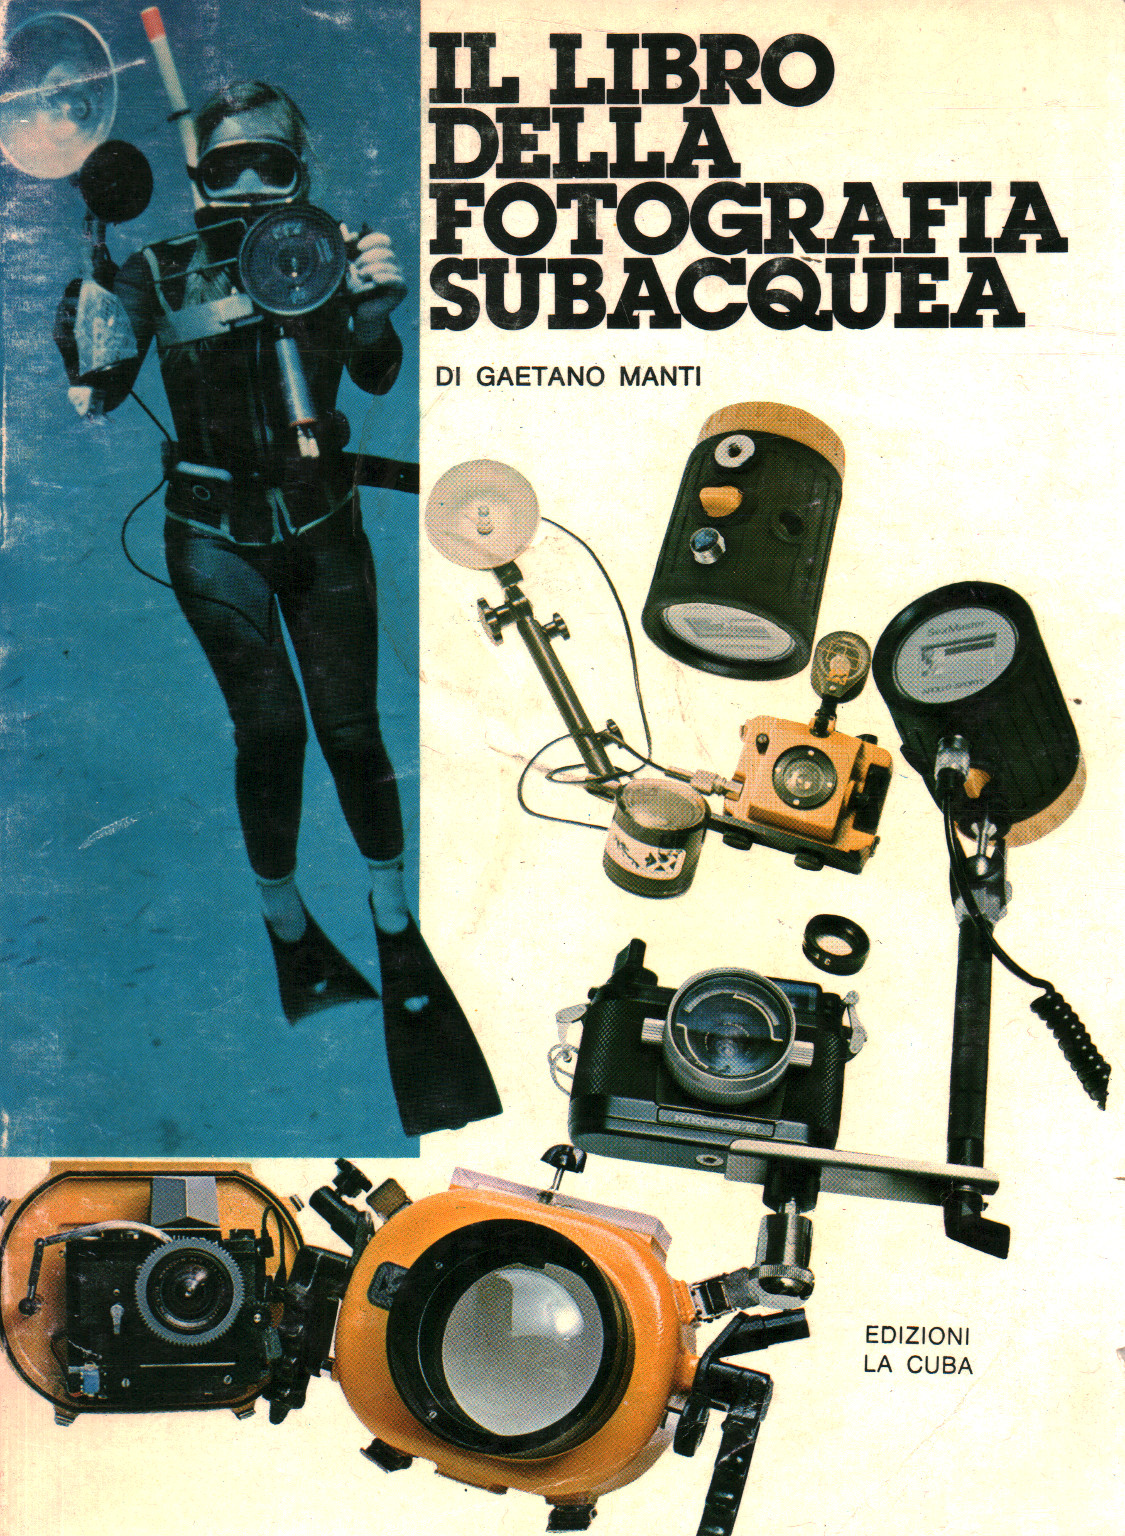 The book of underwater photography, s.a.